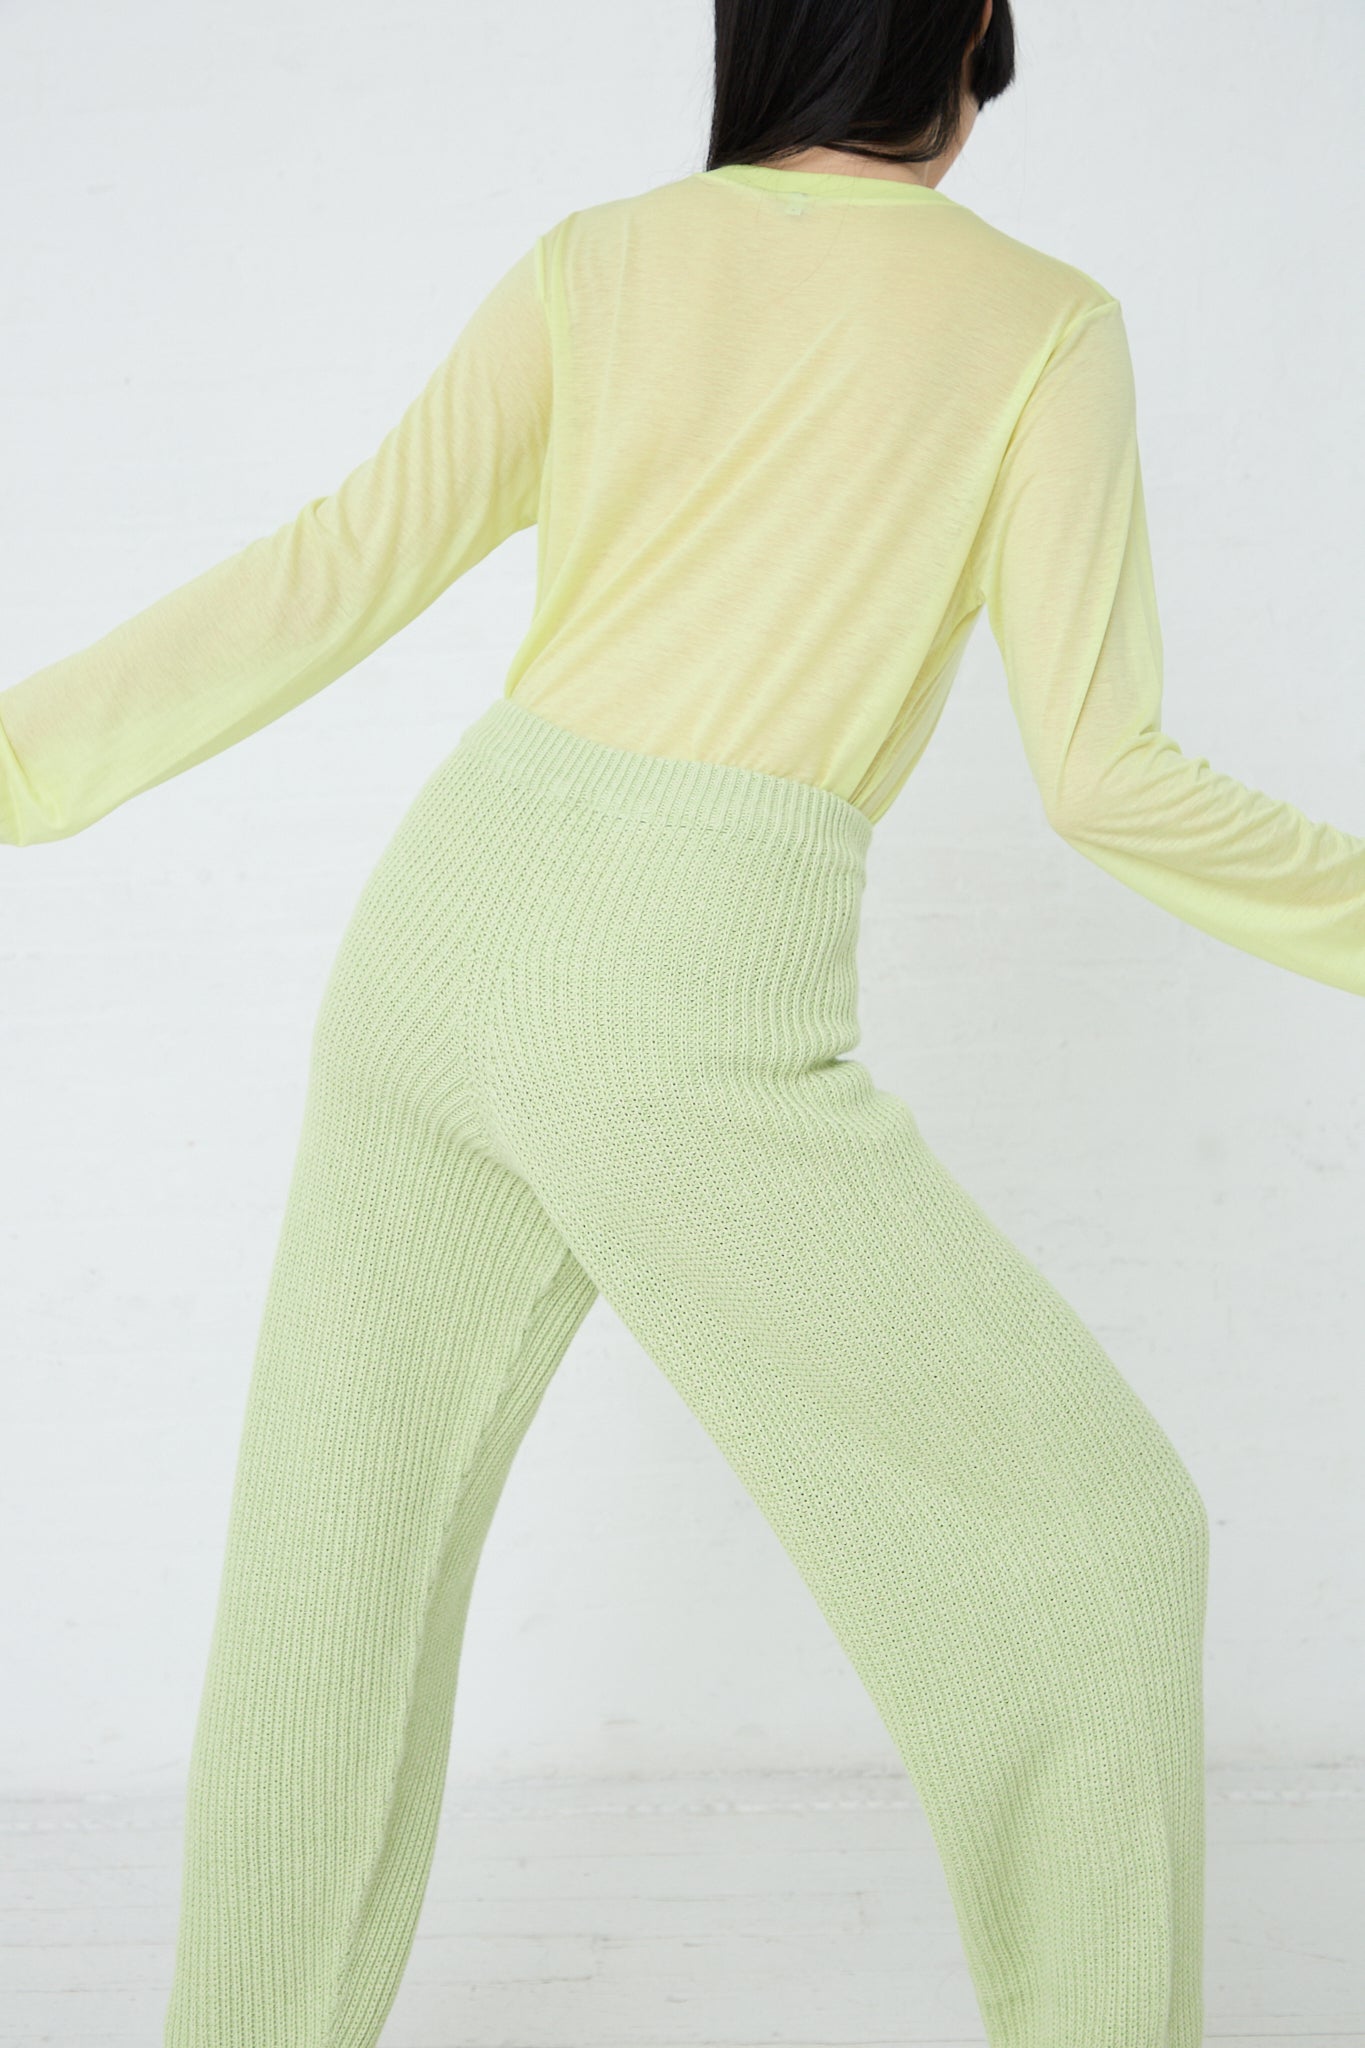 A woman wearing Baserange's Cotton Dodd Pant in Mimosa, sustainably produced green pants.